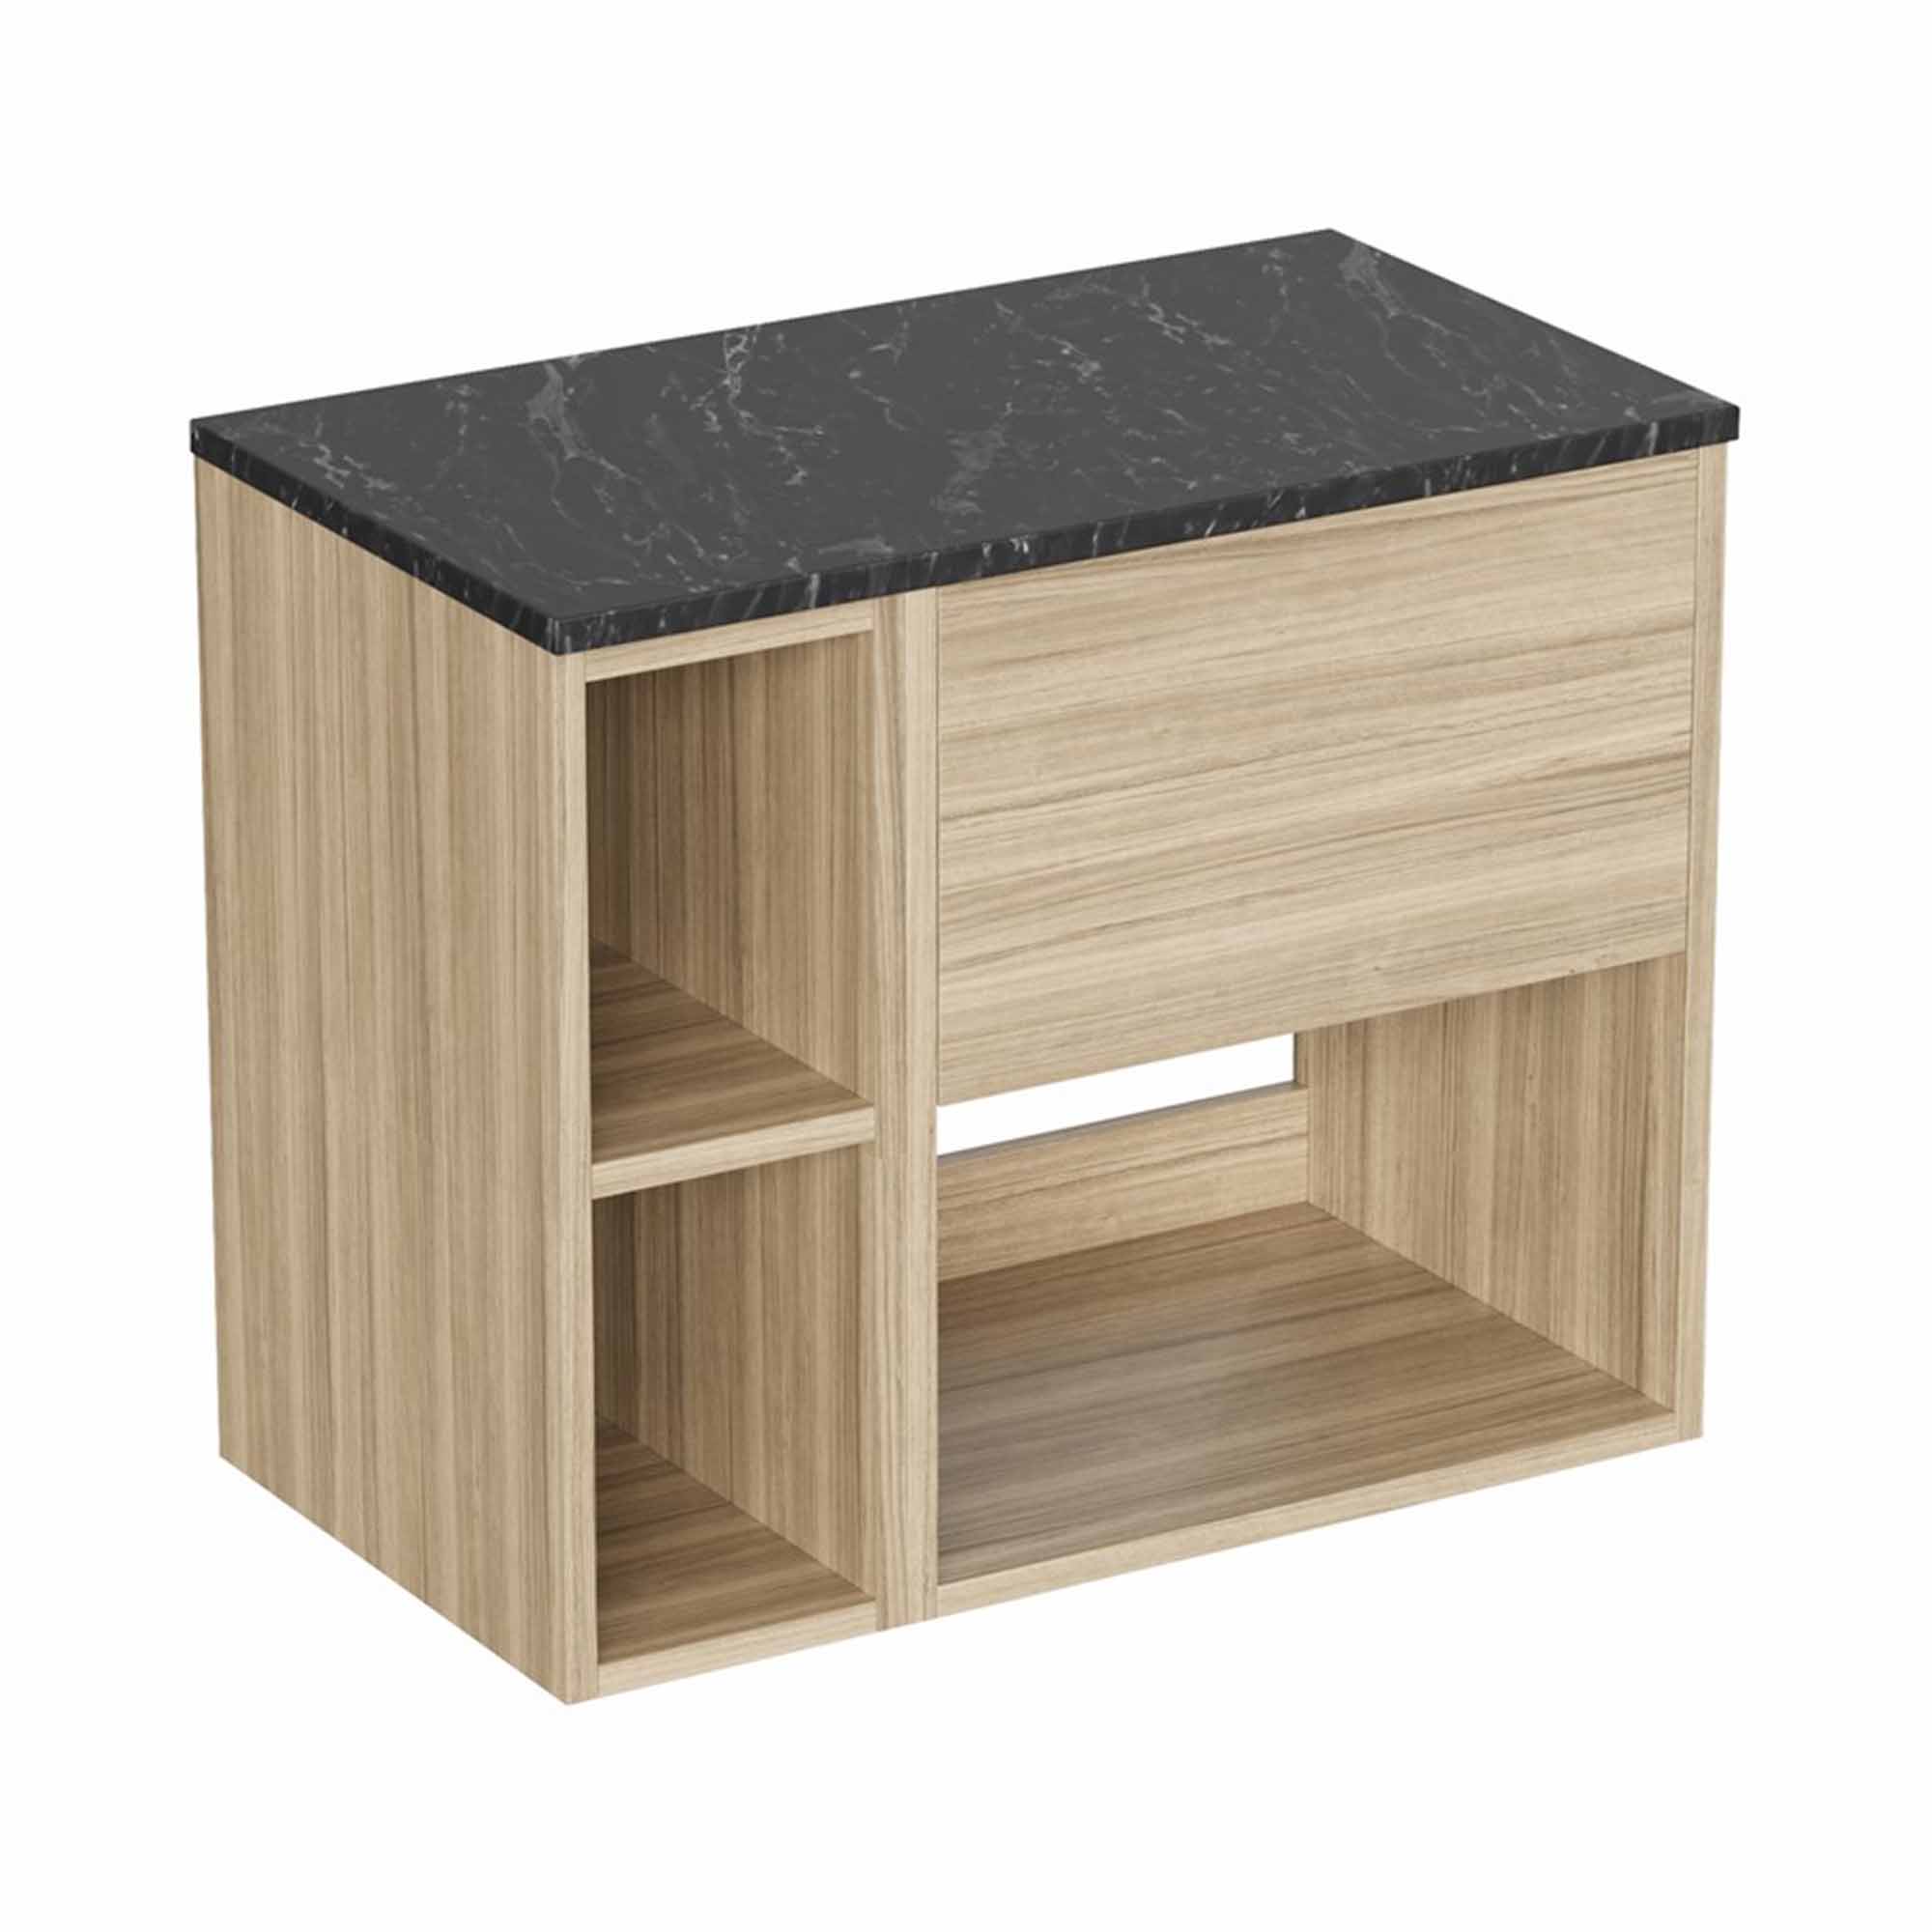 hackney 700 wall mounted vanity unit with marquina worktop and shelf unit cherry wood